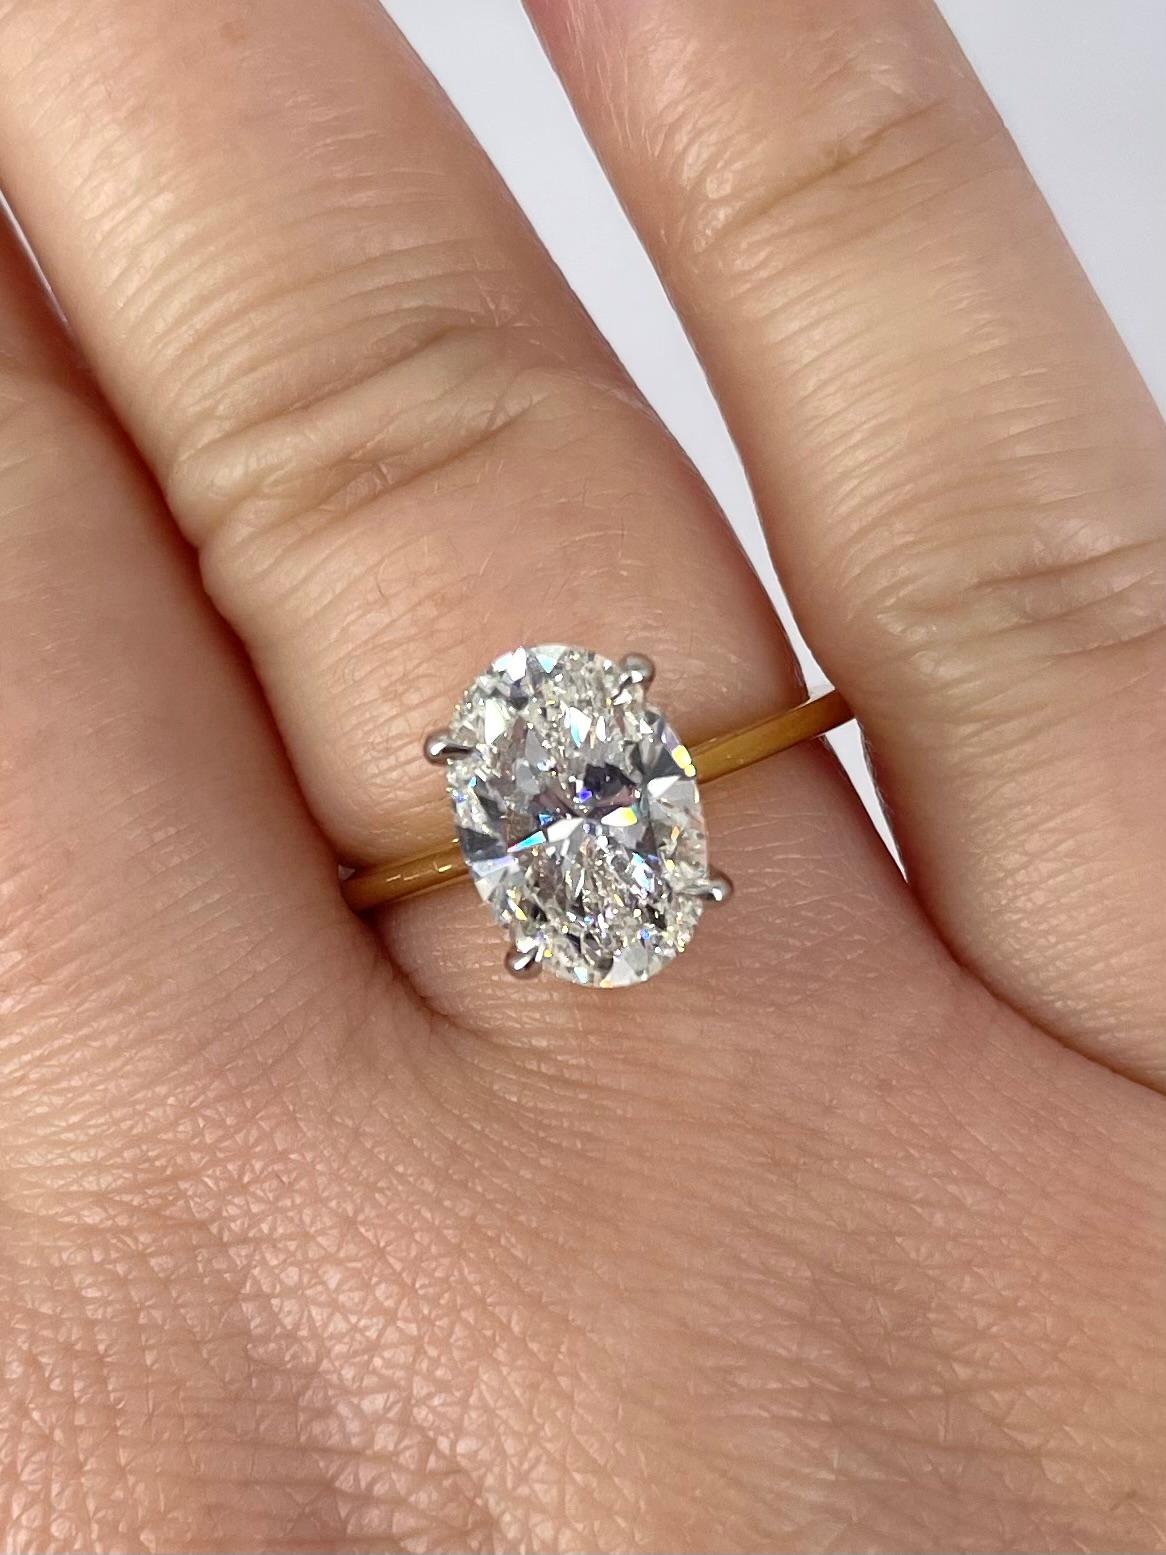 J. Birnbach 3.01ct GIA GVS1 Oval Diamond Solitaire Engagement Ring in 18K Gold In New Condition For Sale In New York, NY